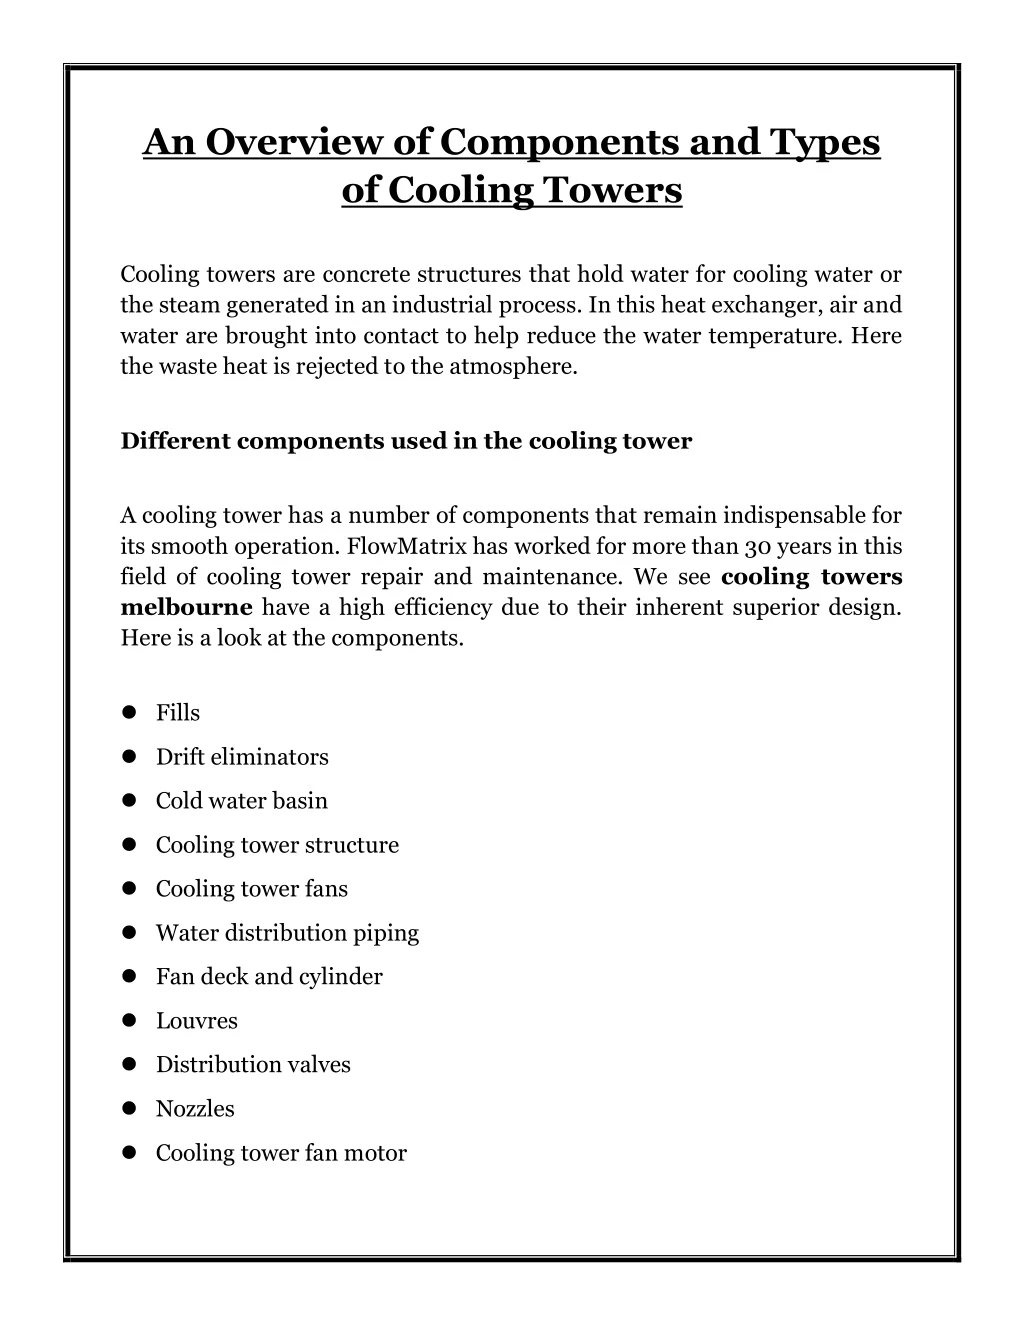 an overview of components and types of cooling